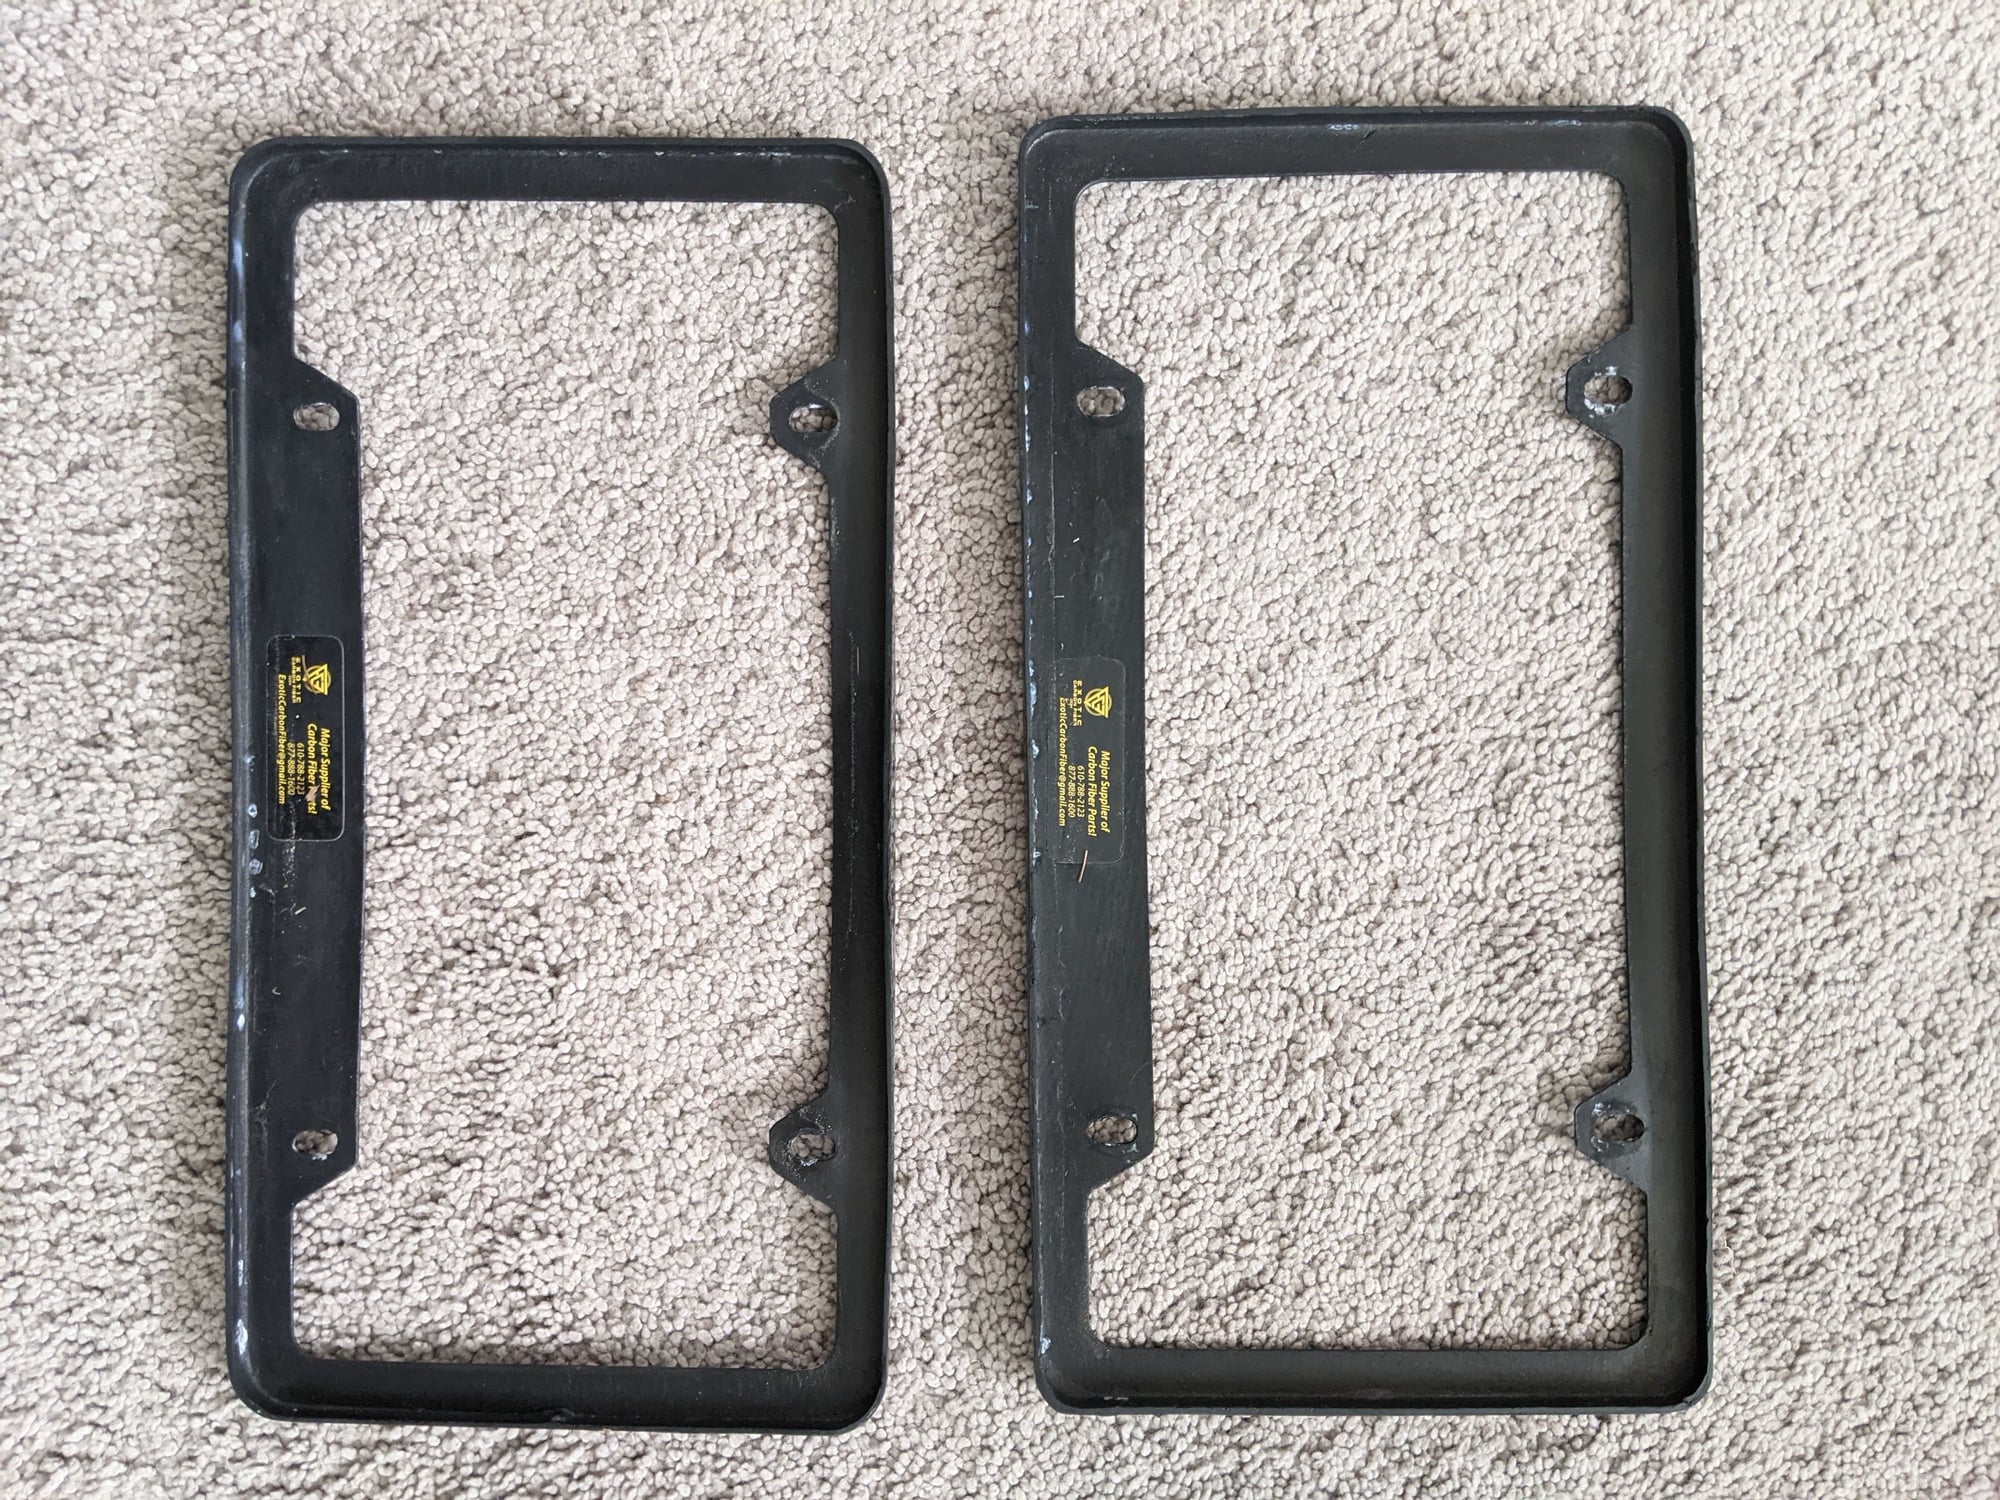 Accessories - RennTech Carbon Fiber License Plate Frames - Used - All Years Any Make All Models - Clifton, VA 20124, United States